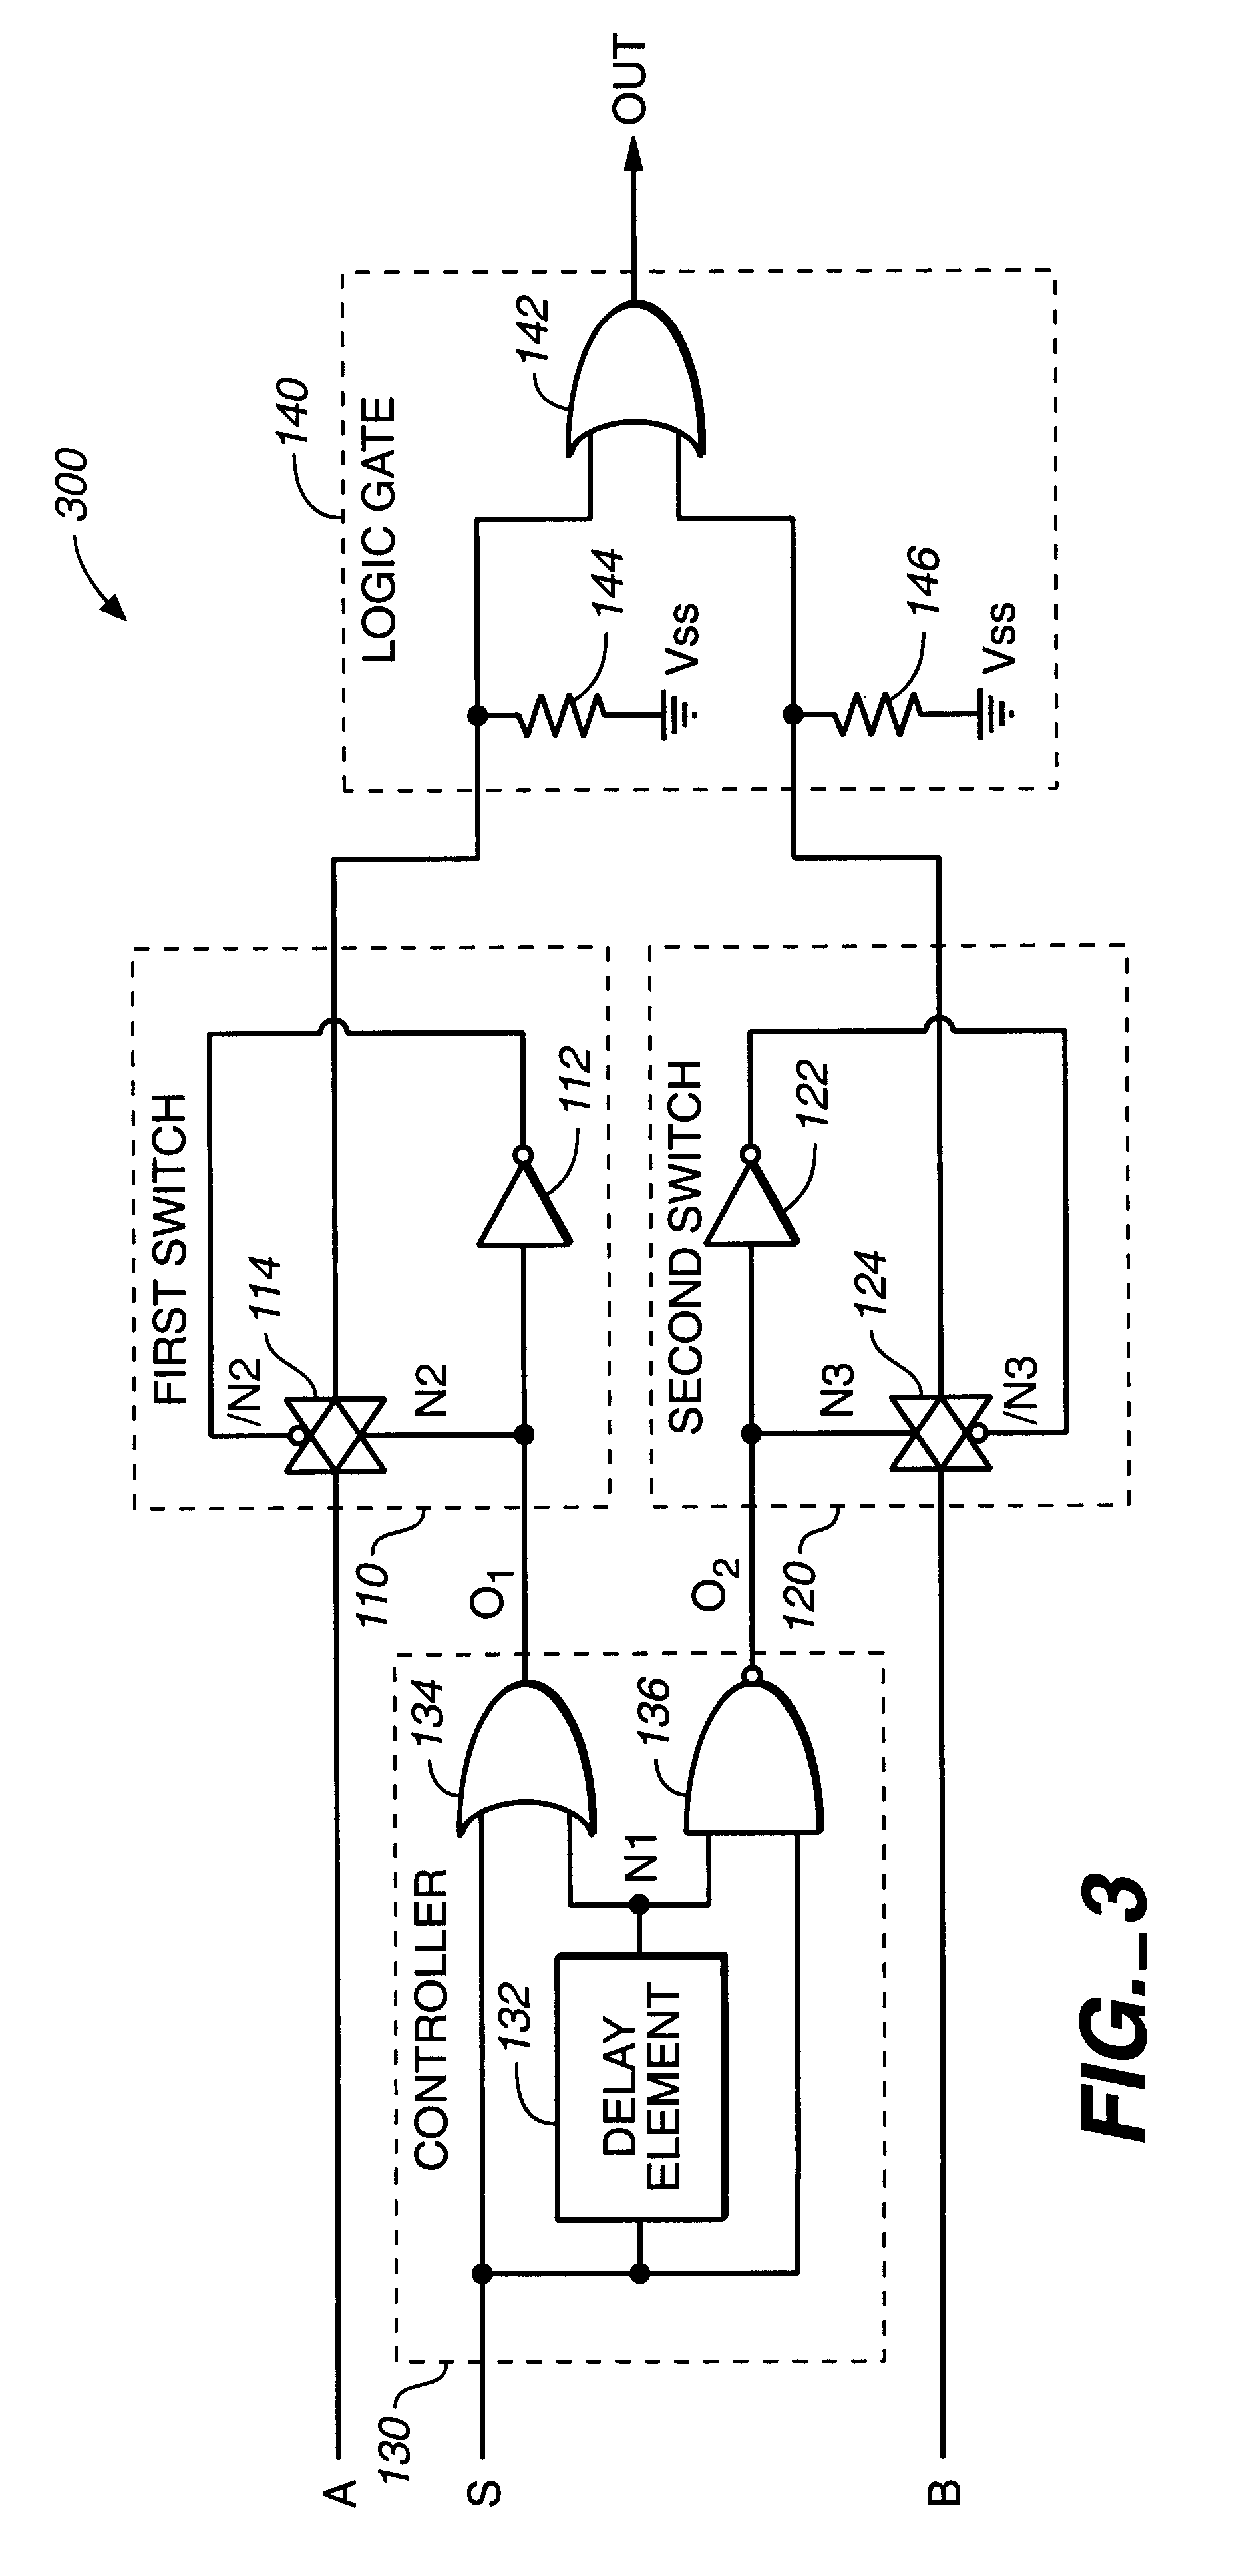 Circuit and method for fast parallel data strobe encoding